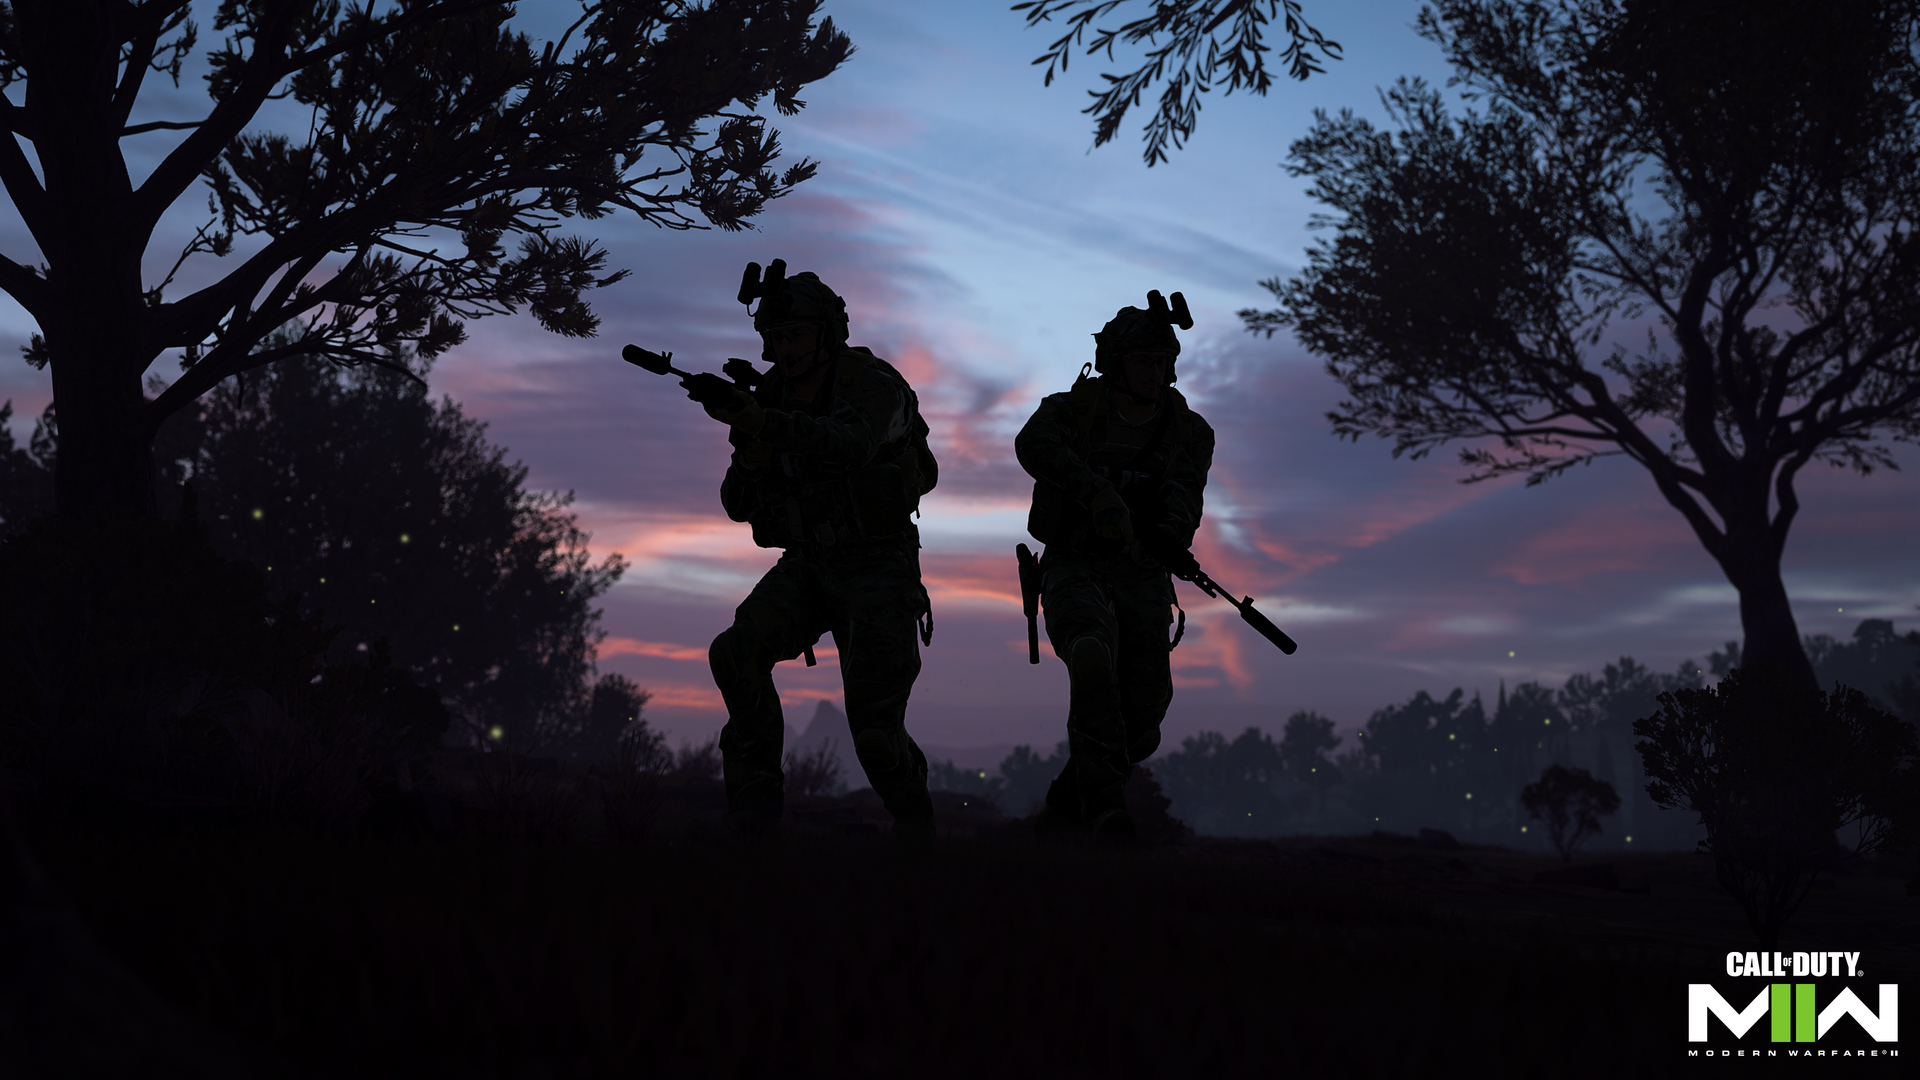 Video game screenshot of two soldiers at dusk